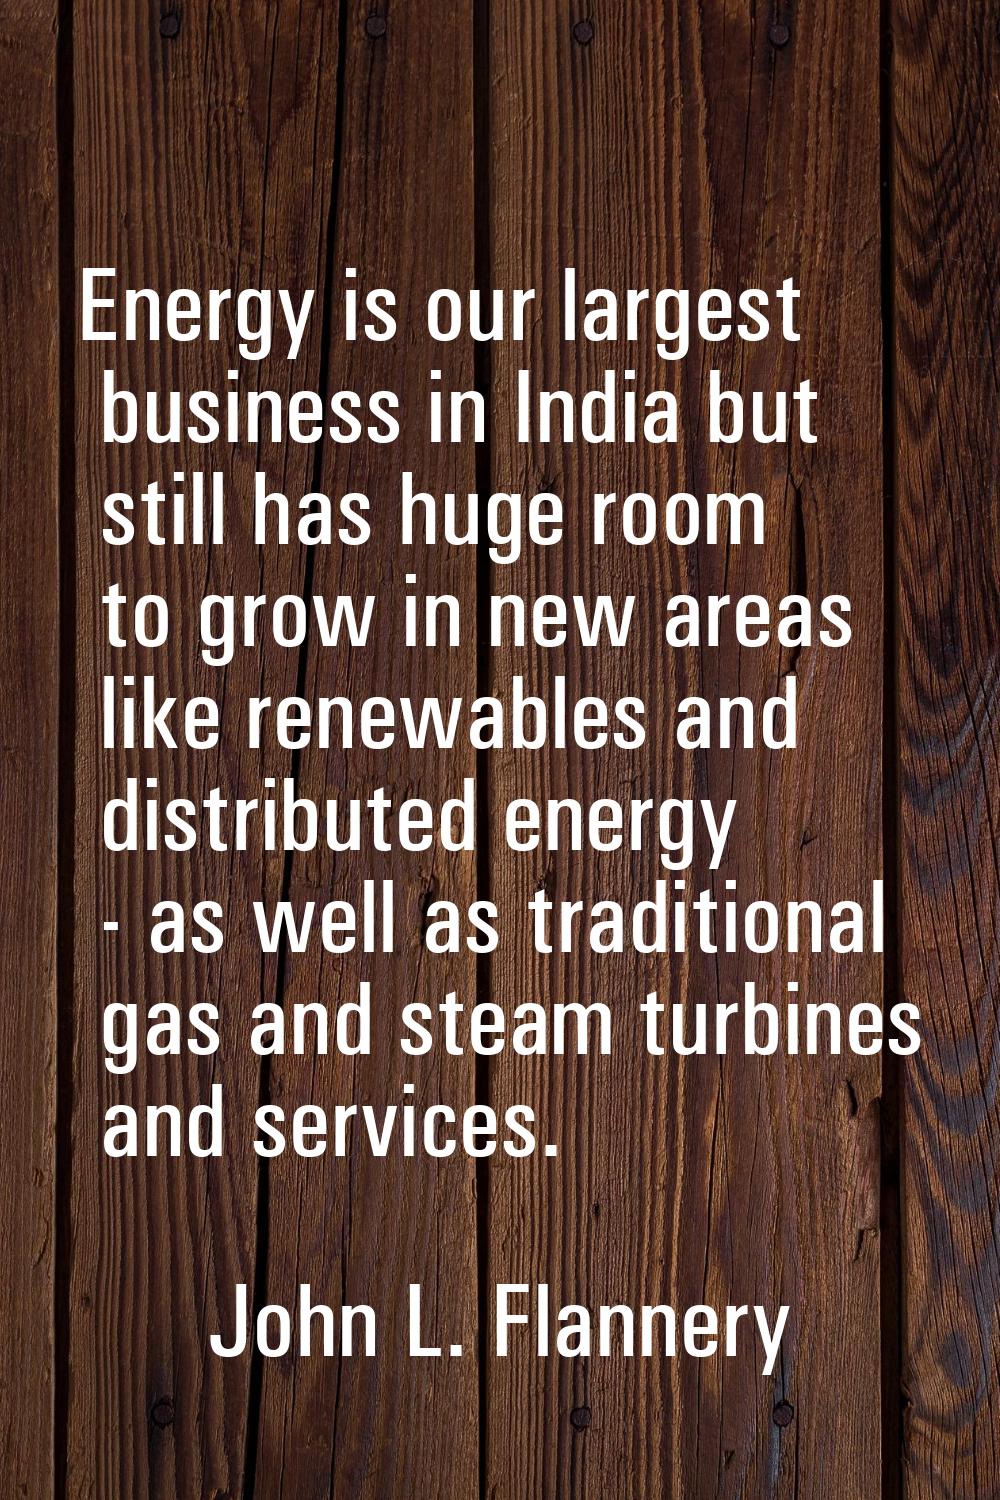 Energy is our largest business in India but still has huge room to grow in new areas like renewable